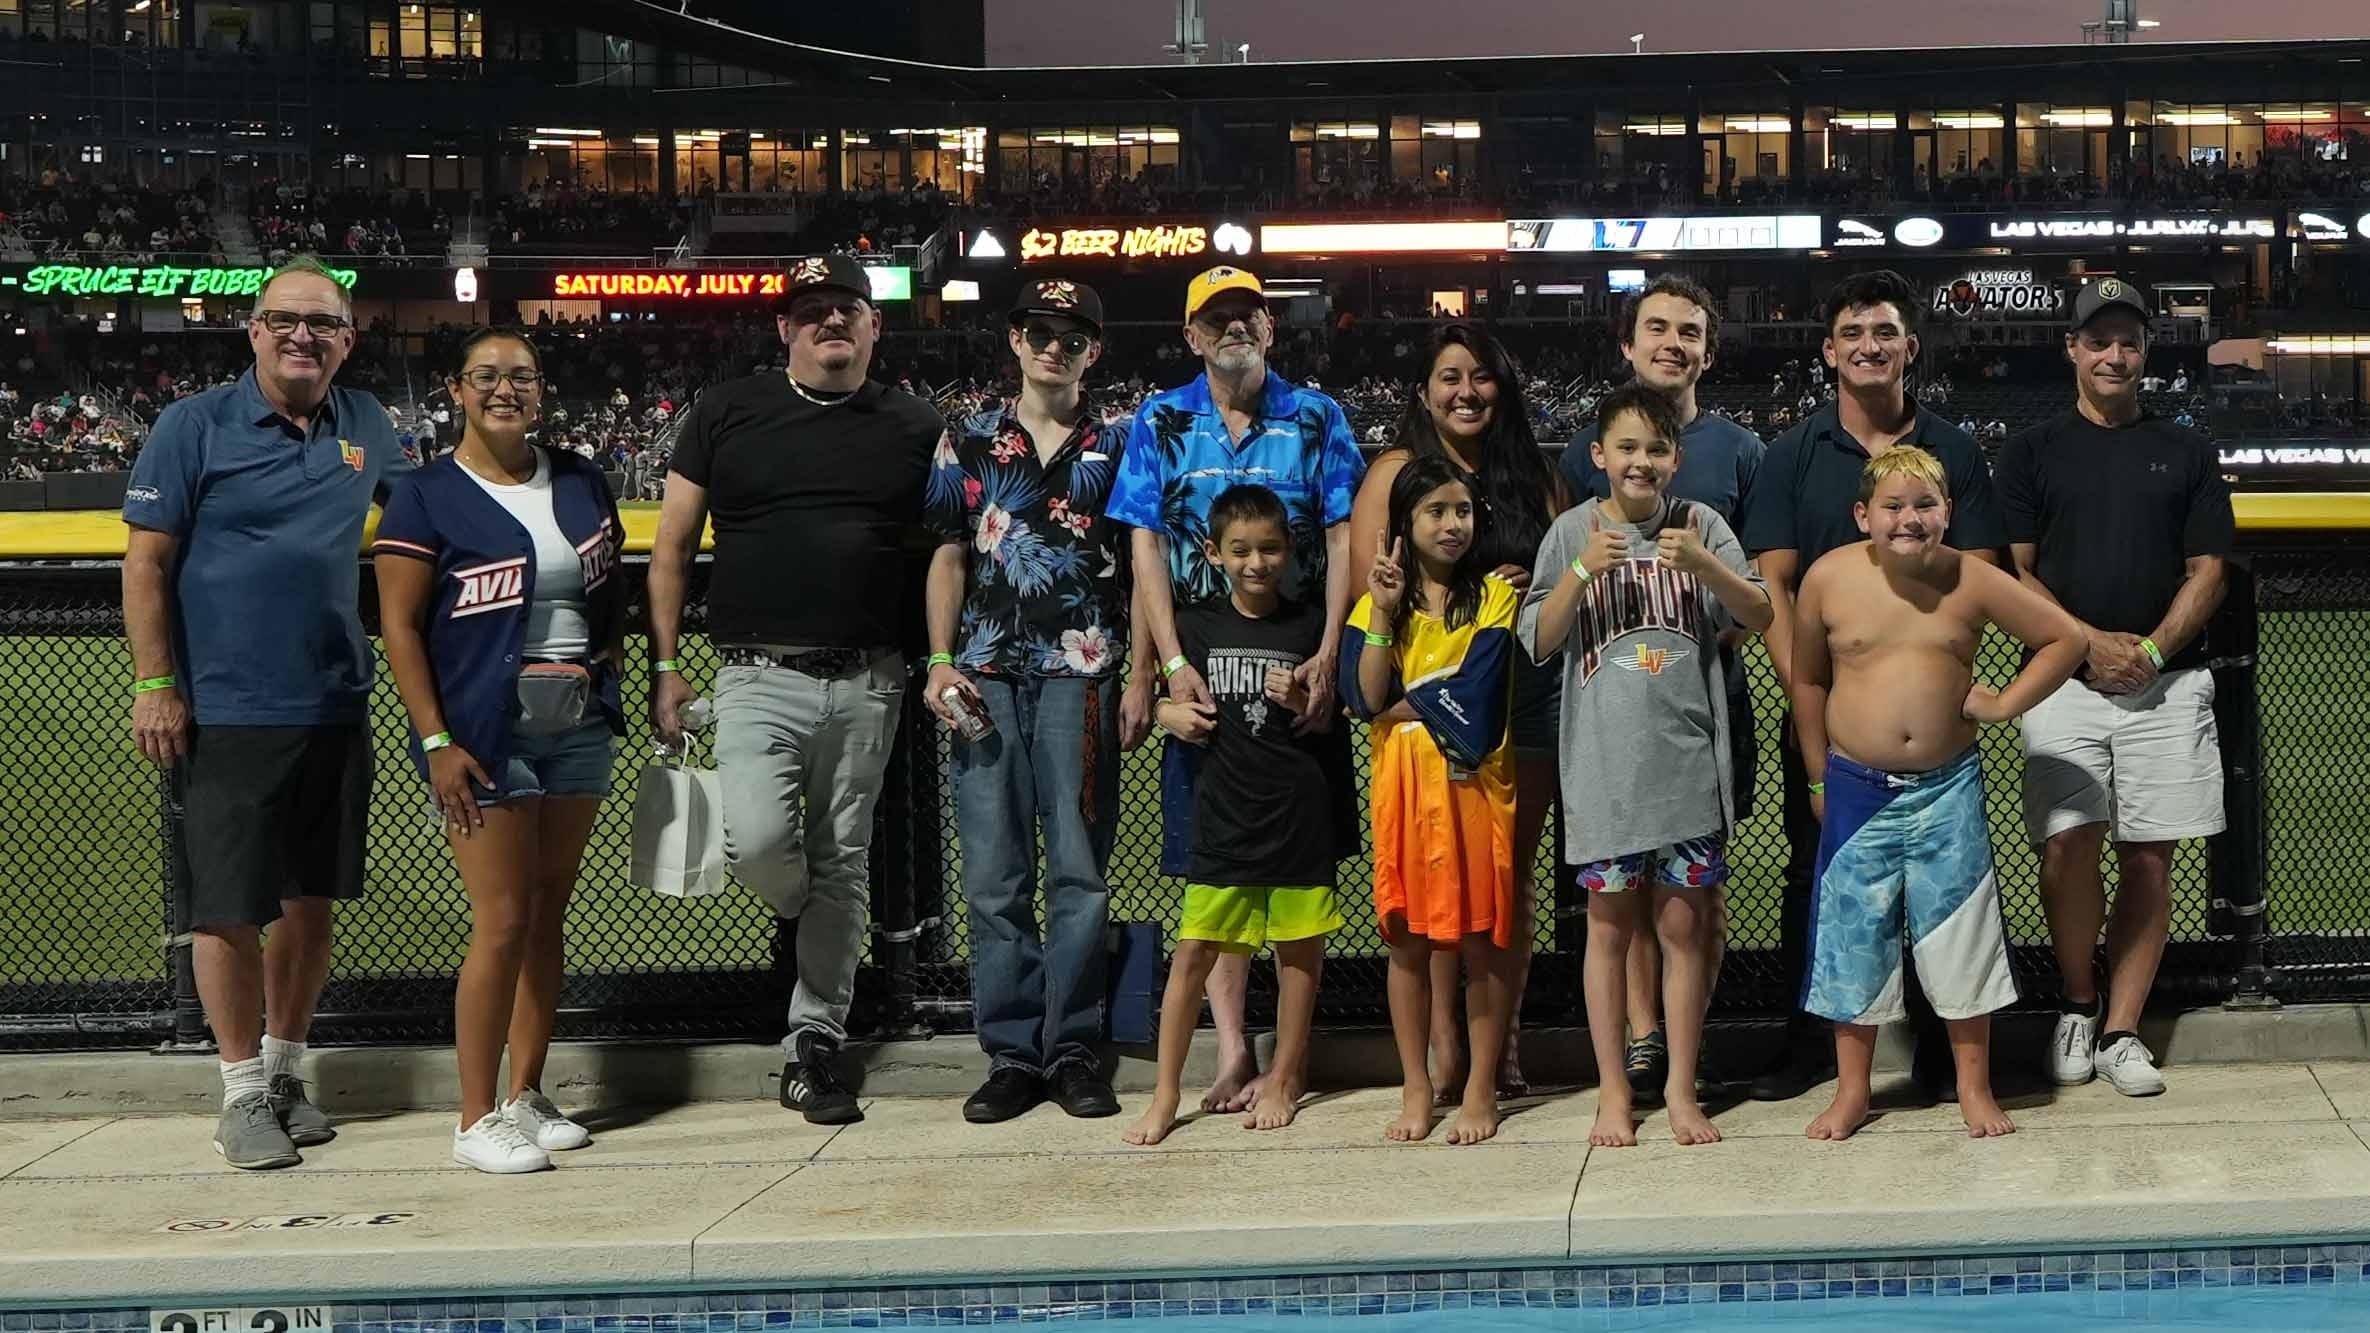 Participants from Big Brothers Big Sisters of Southern Nevada had the pool area to themselves during an Aviators game at Las Vegas Ballpark.